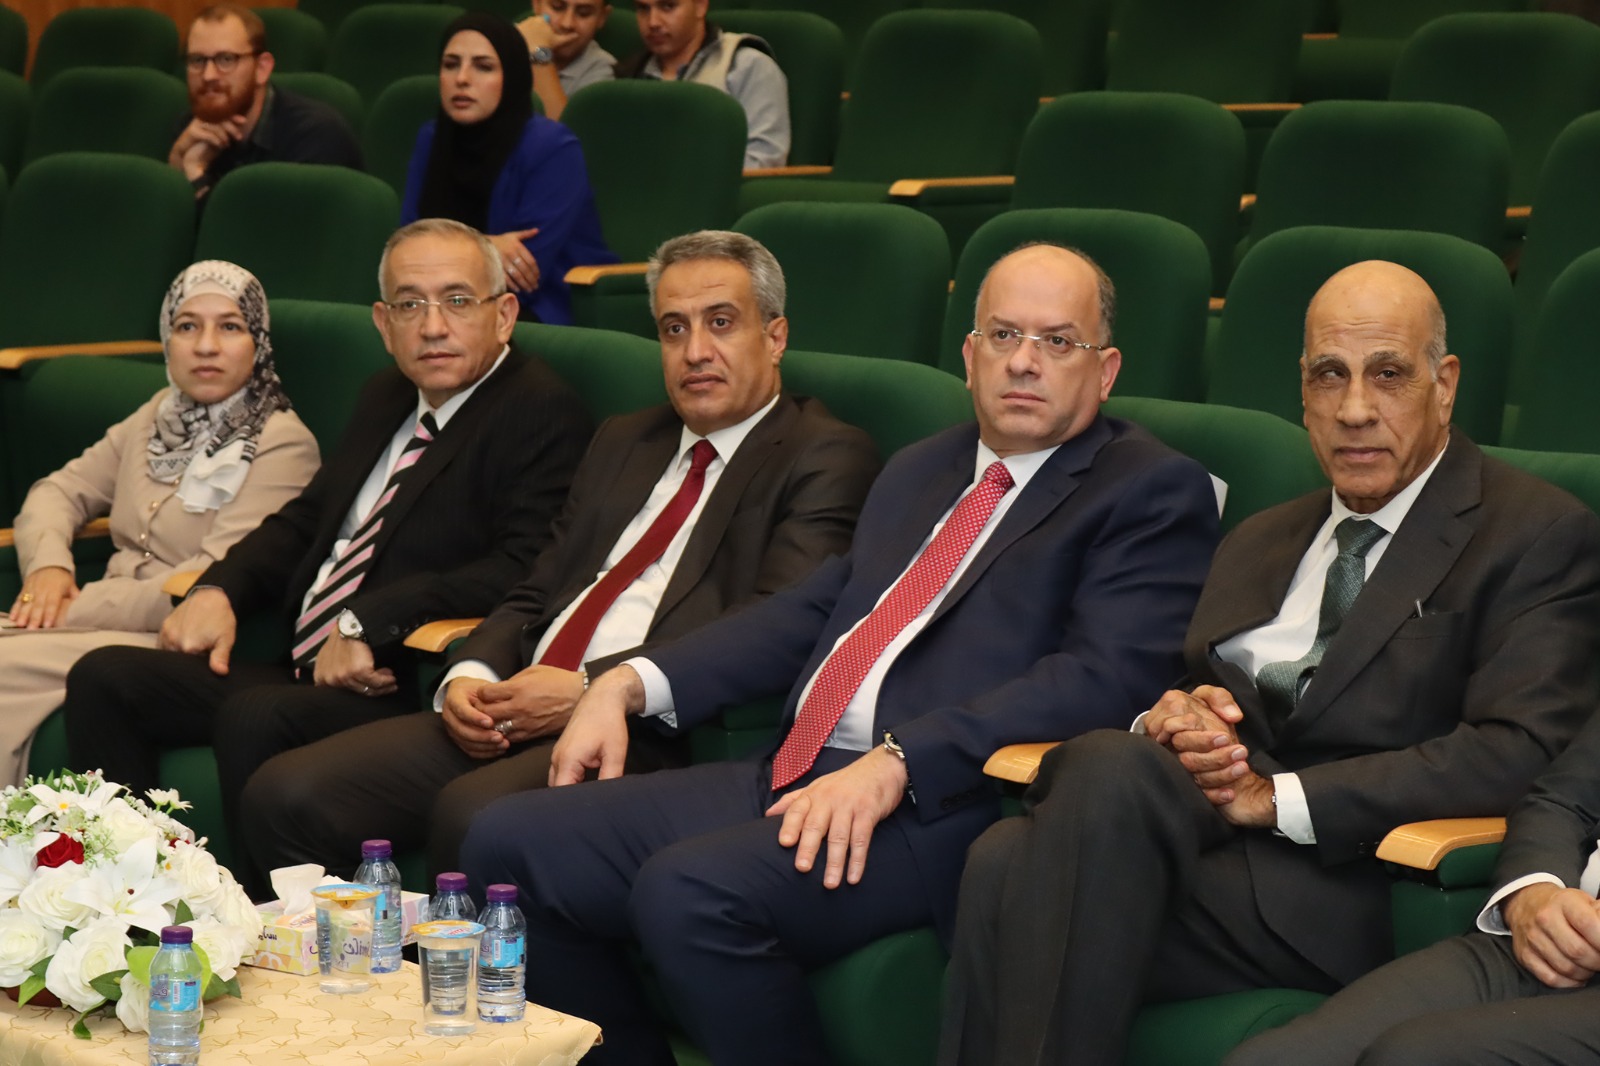 An introductory seminar on the Erasmus Plus program for the southern region at Al Hussein bin Talal University.